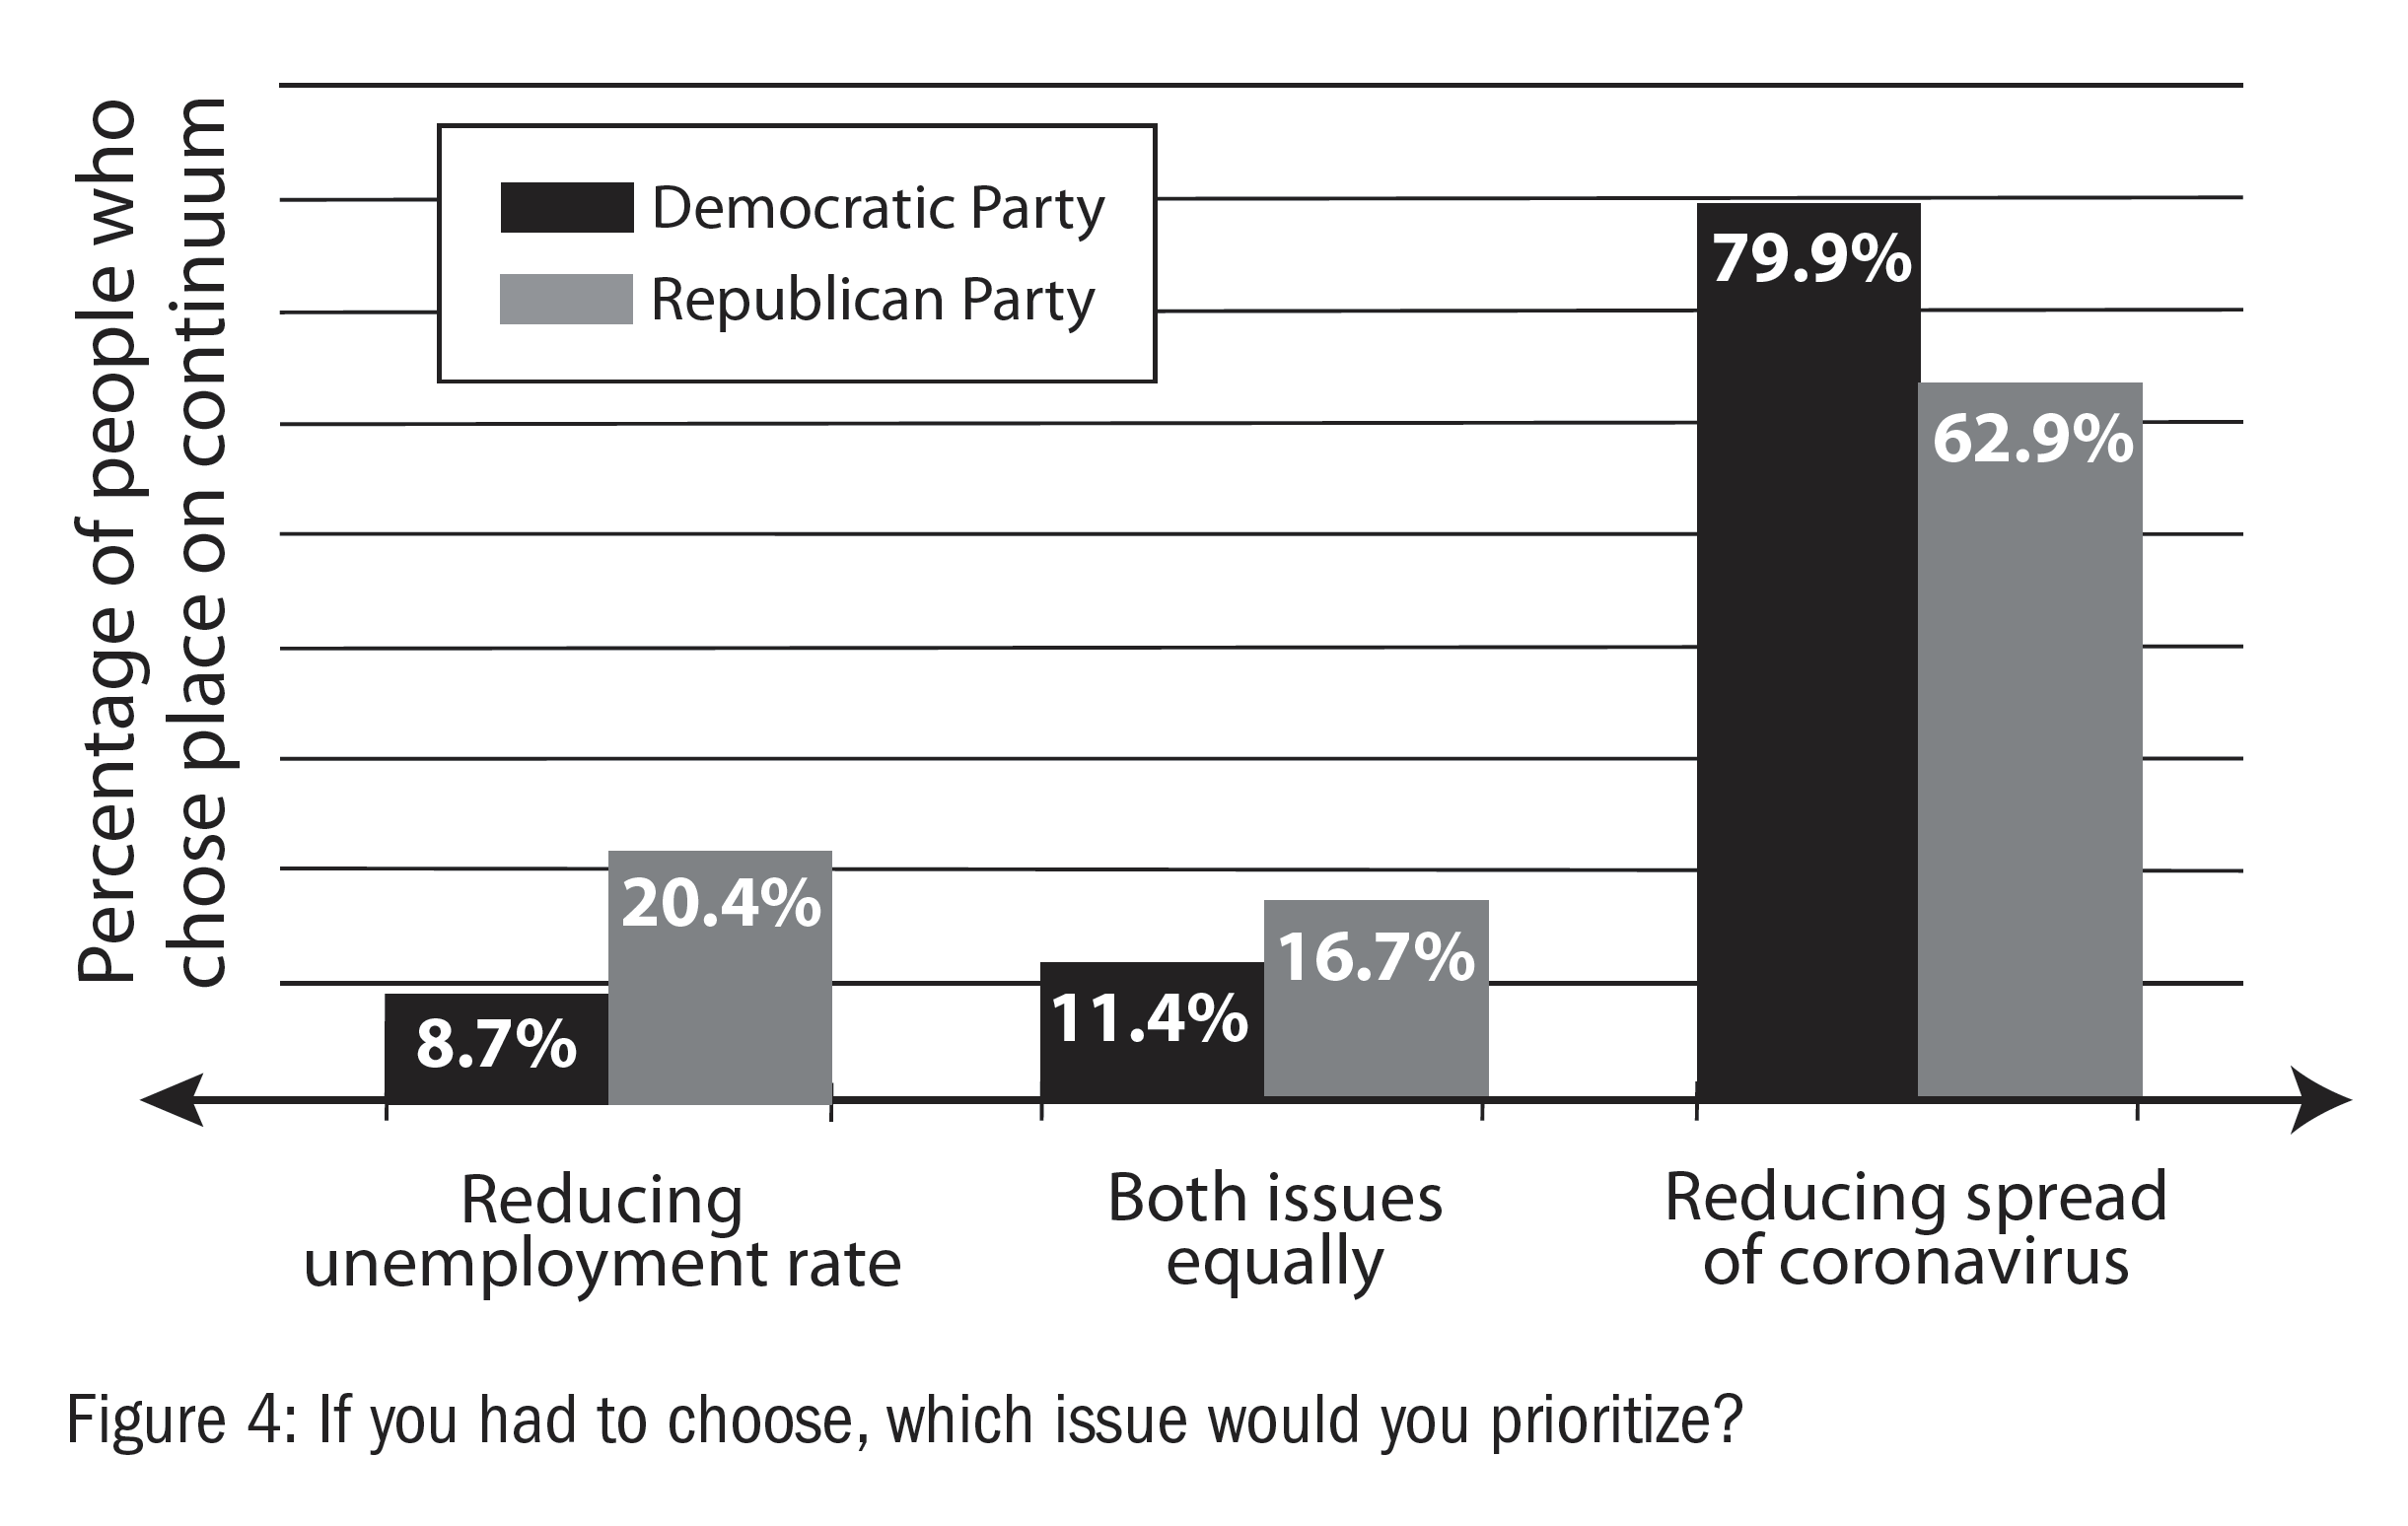 Figure 4: If you had to choose, which issue would you prioritize?